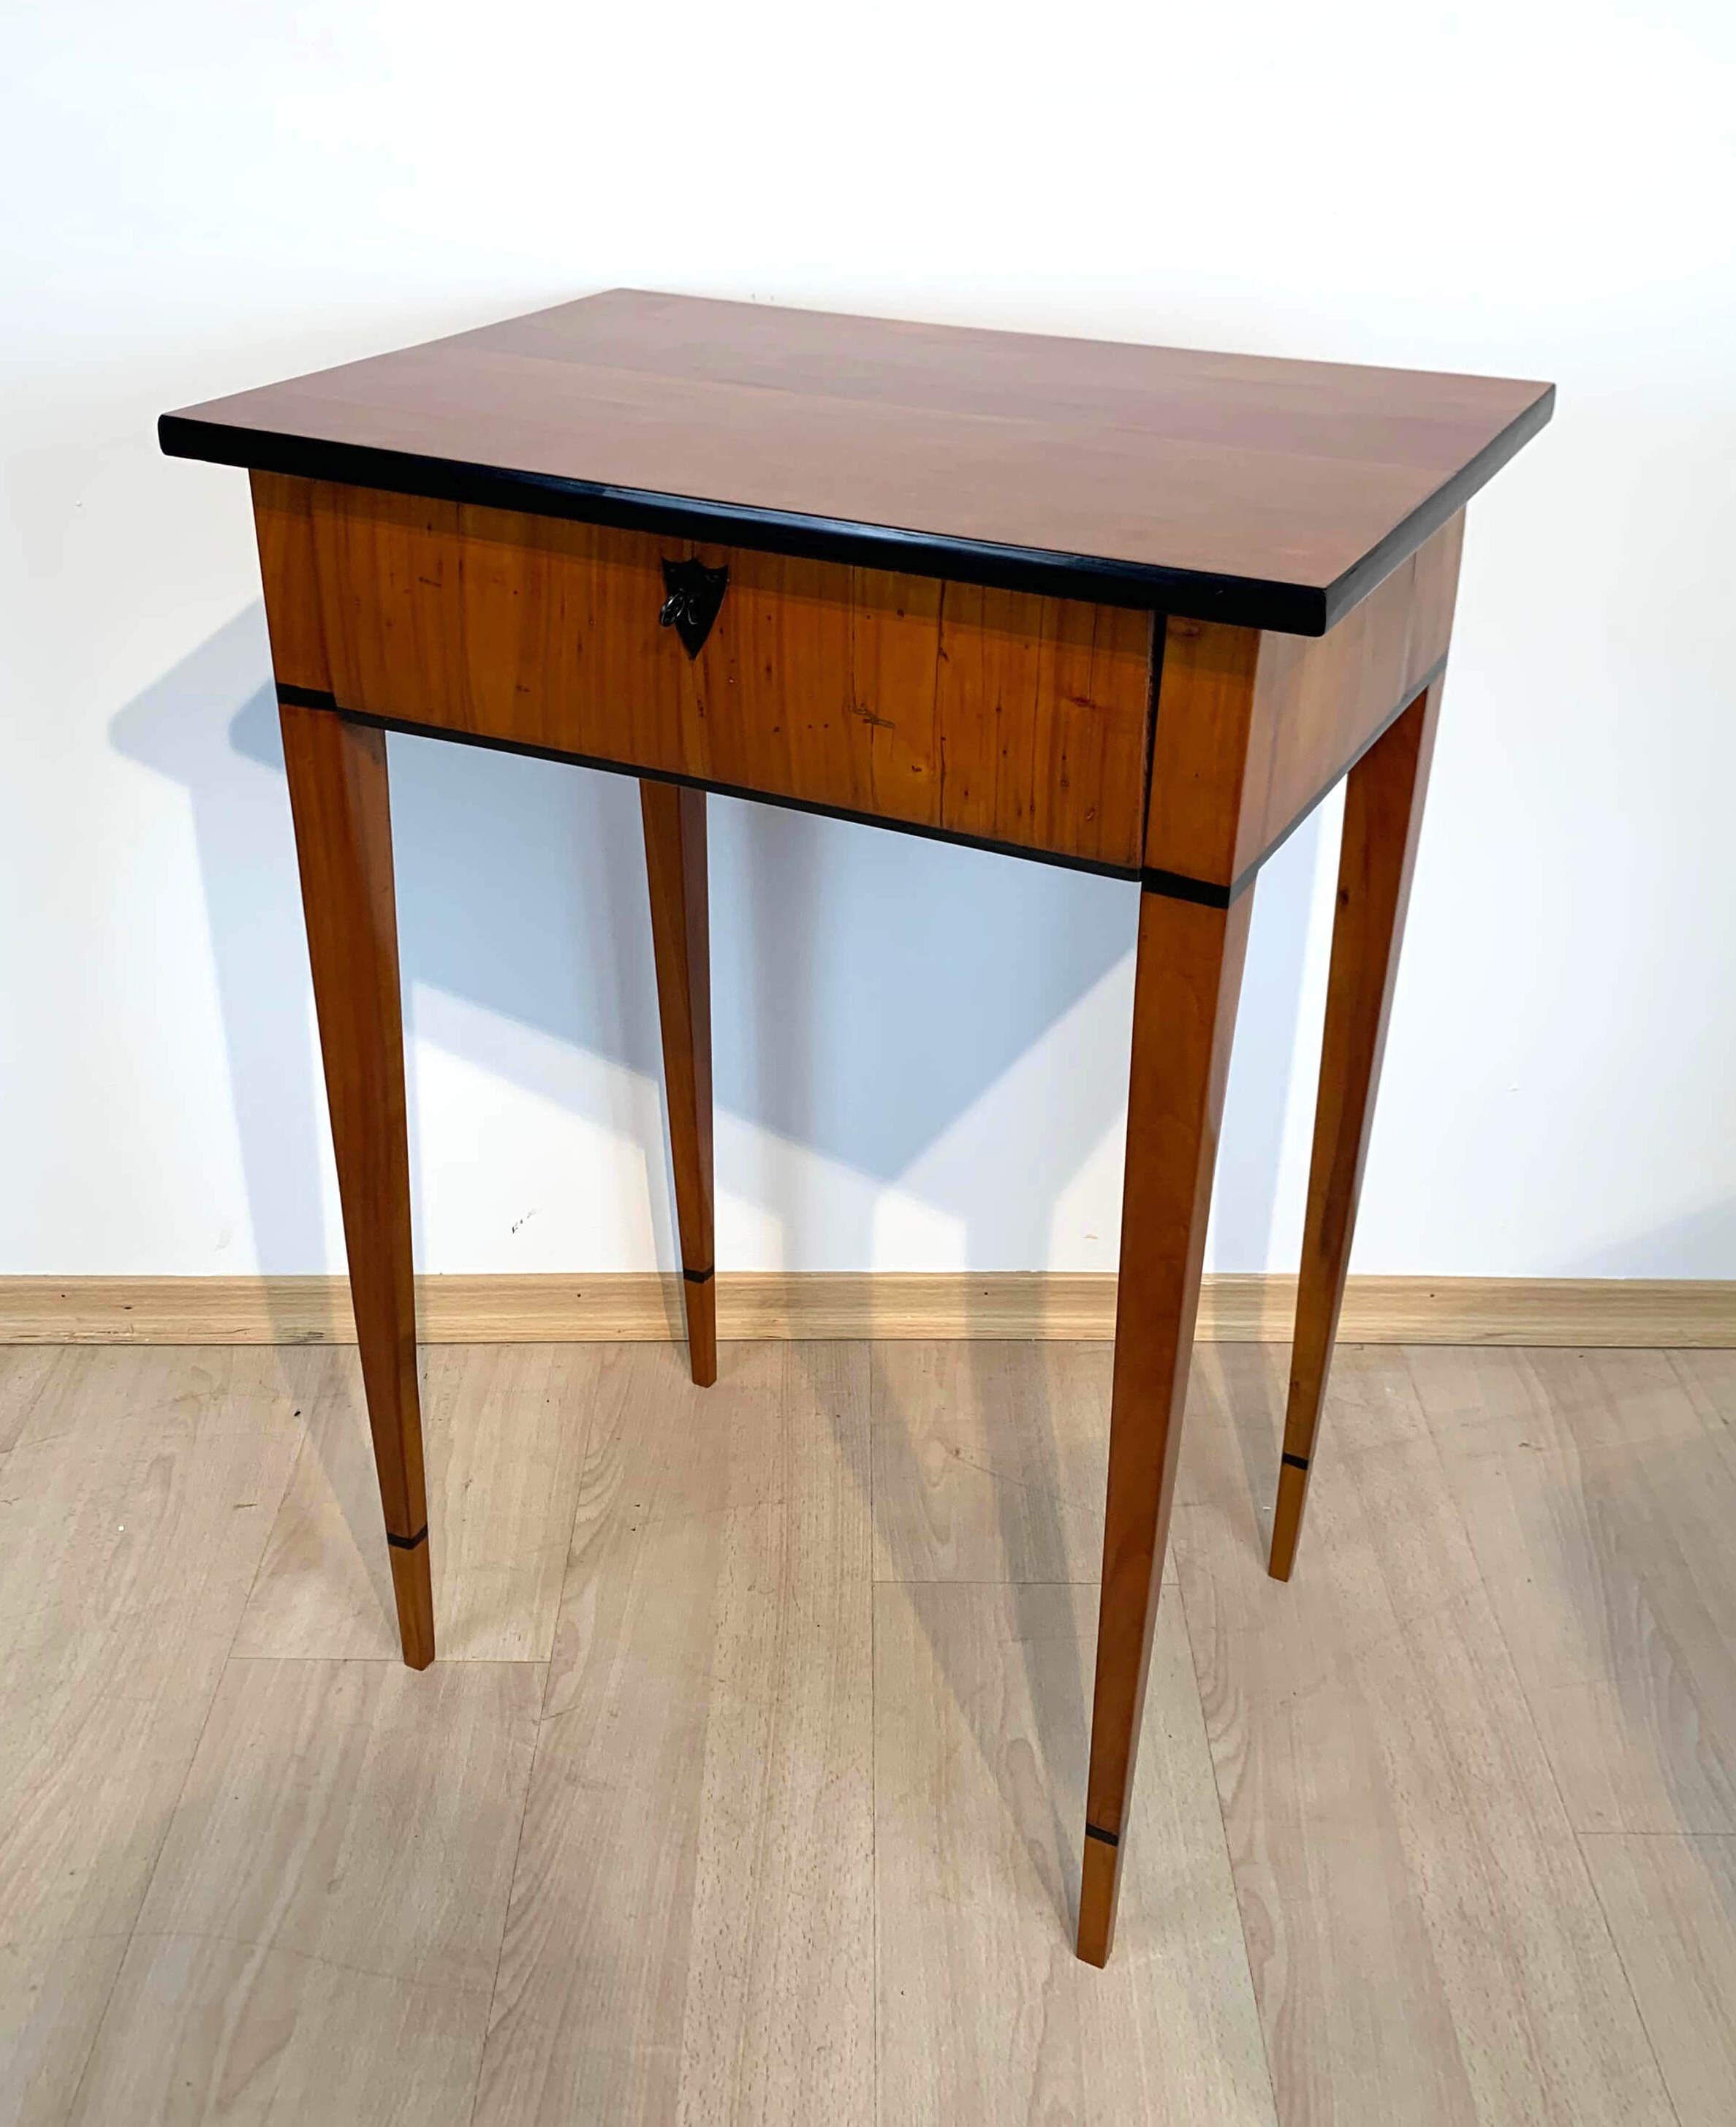 Strict, elegant Biedermeier side table with drawer, cherry, South Germany, circa 1820

Cherry veneer and solid. One lockable drawer with interior and ebonized key plate. Ebonized edge and surrounding rings. 
Restored condition, refinished with